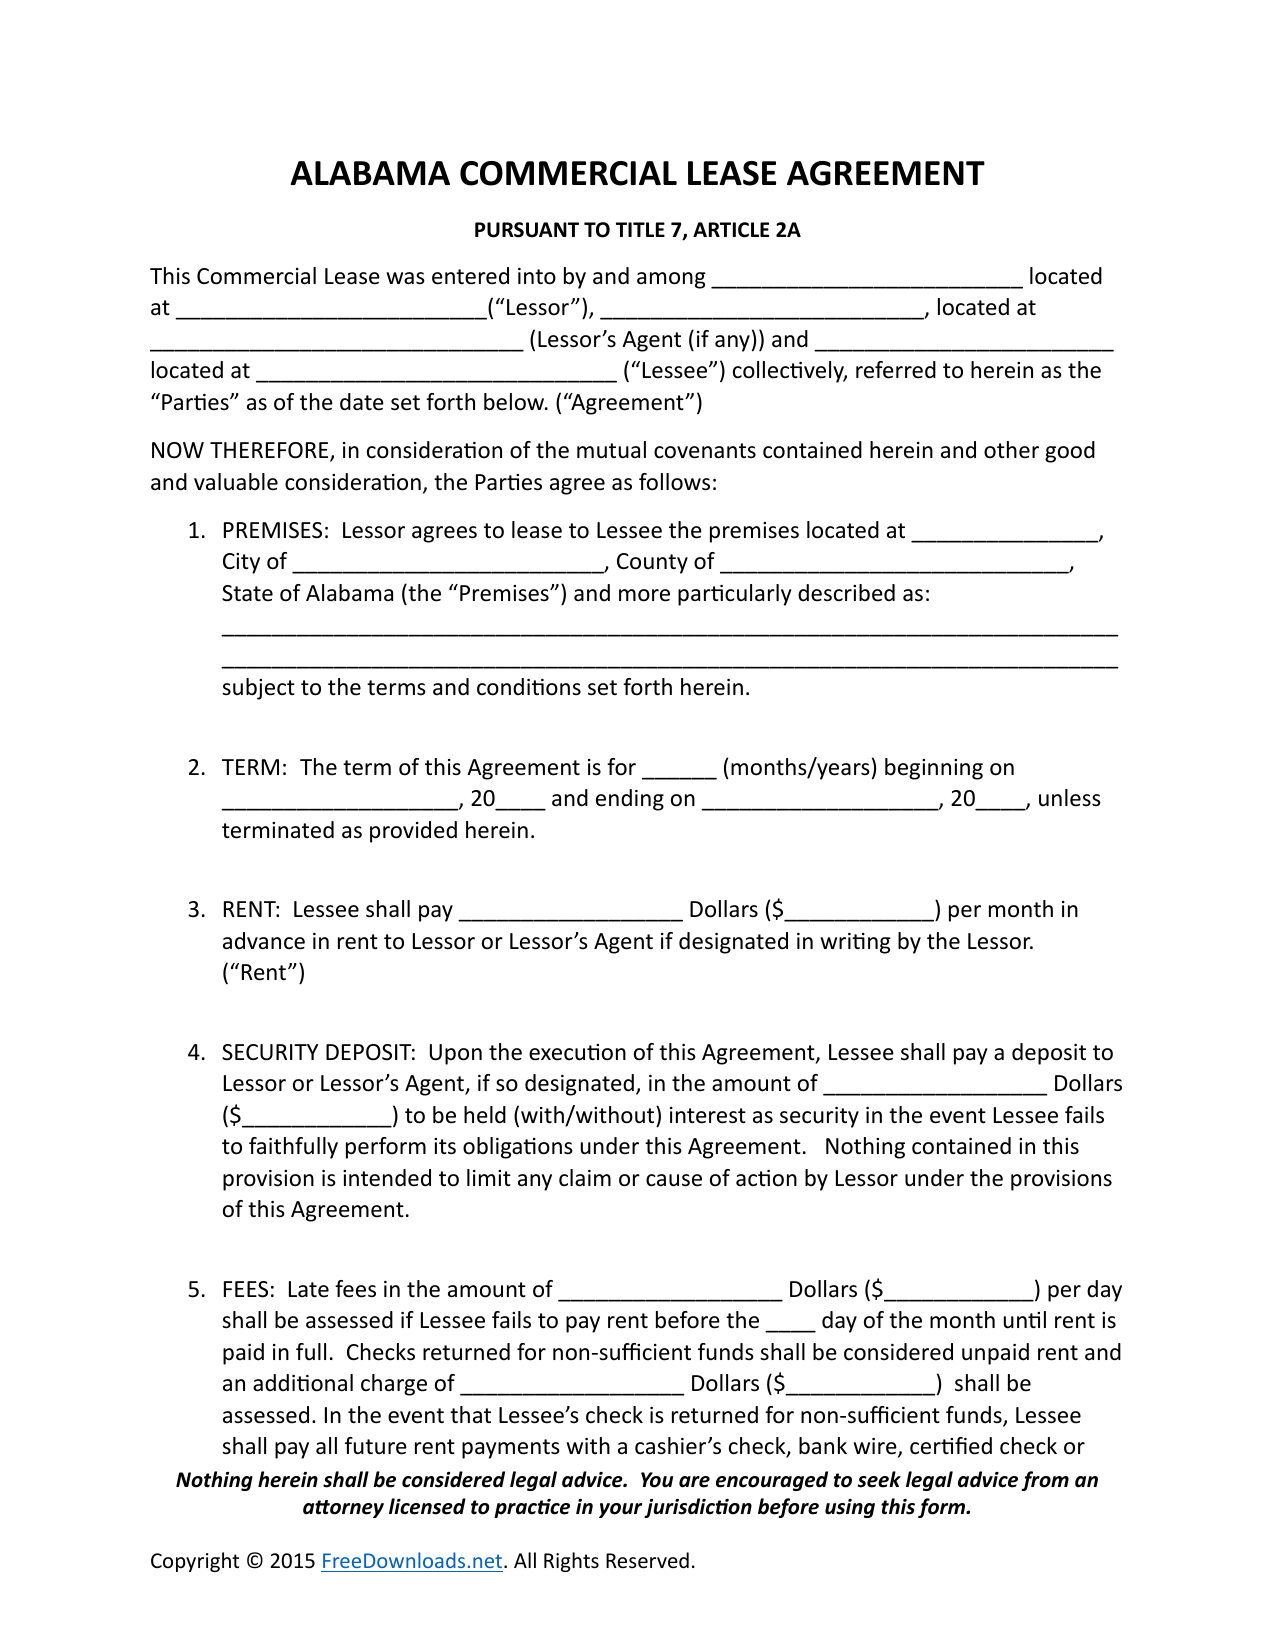 Download Alabama Commercial Lease Agreement Template  PDF  RTF Within free printable commercial lease agreement template